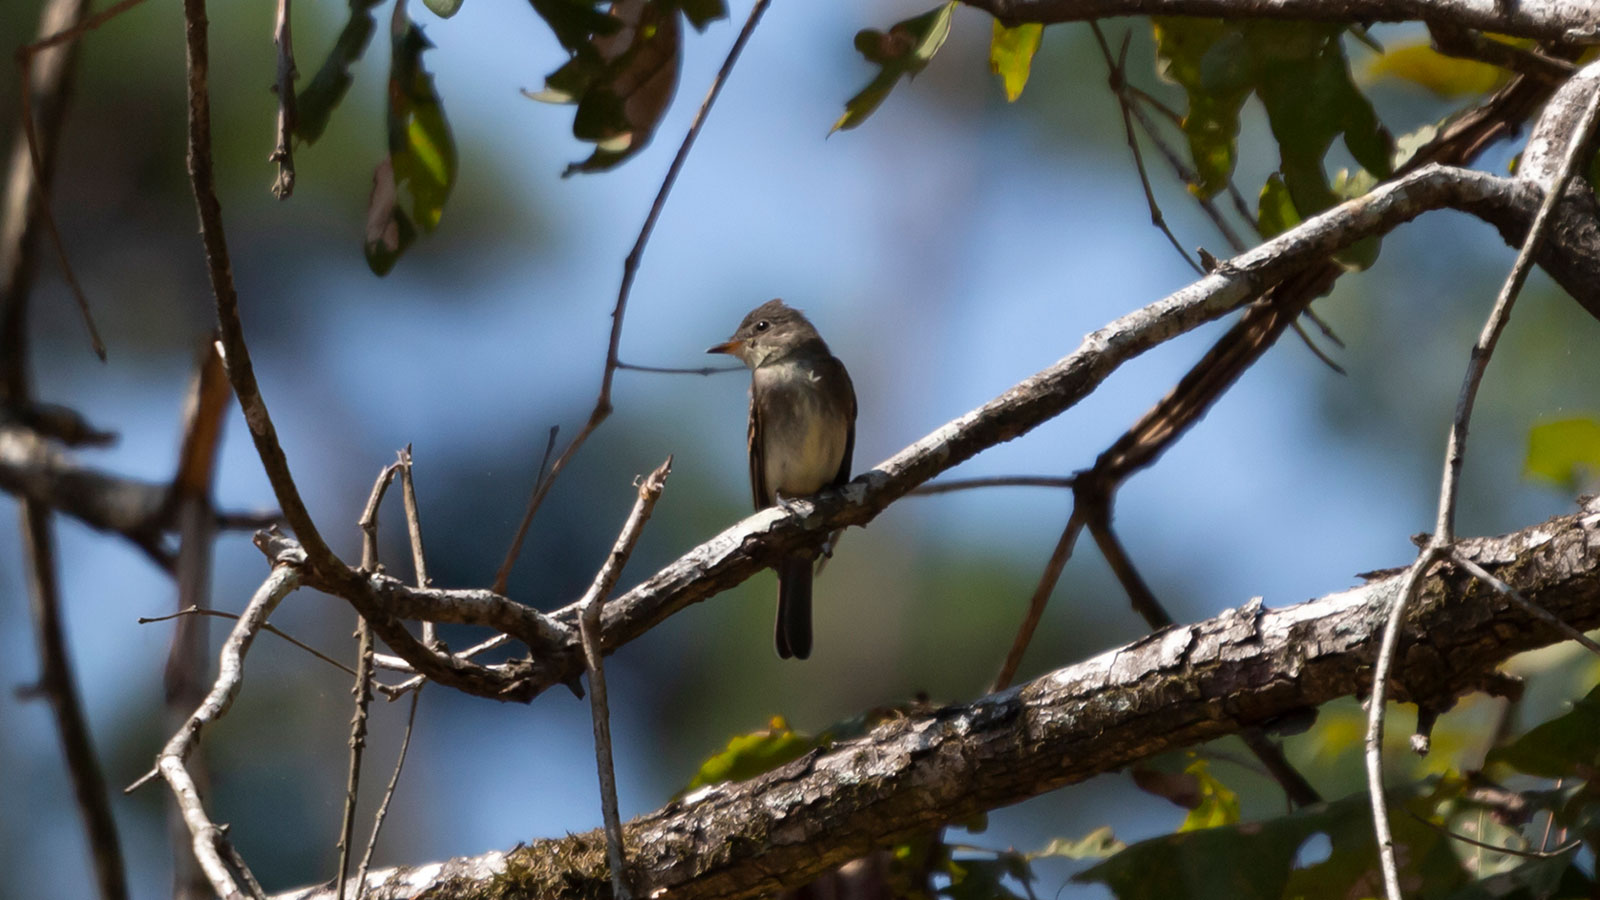 Eastern wood-pewee looking to the side